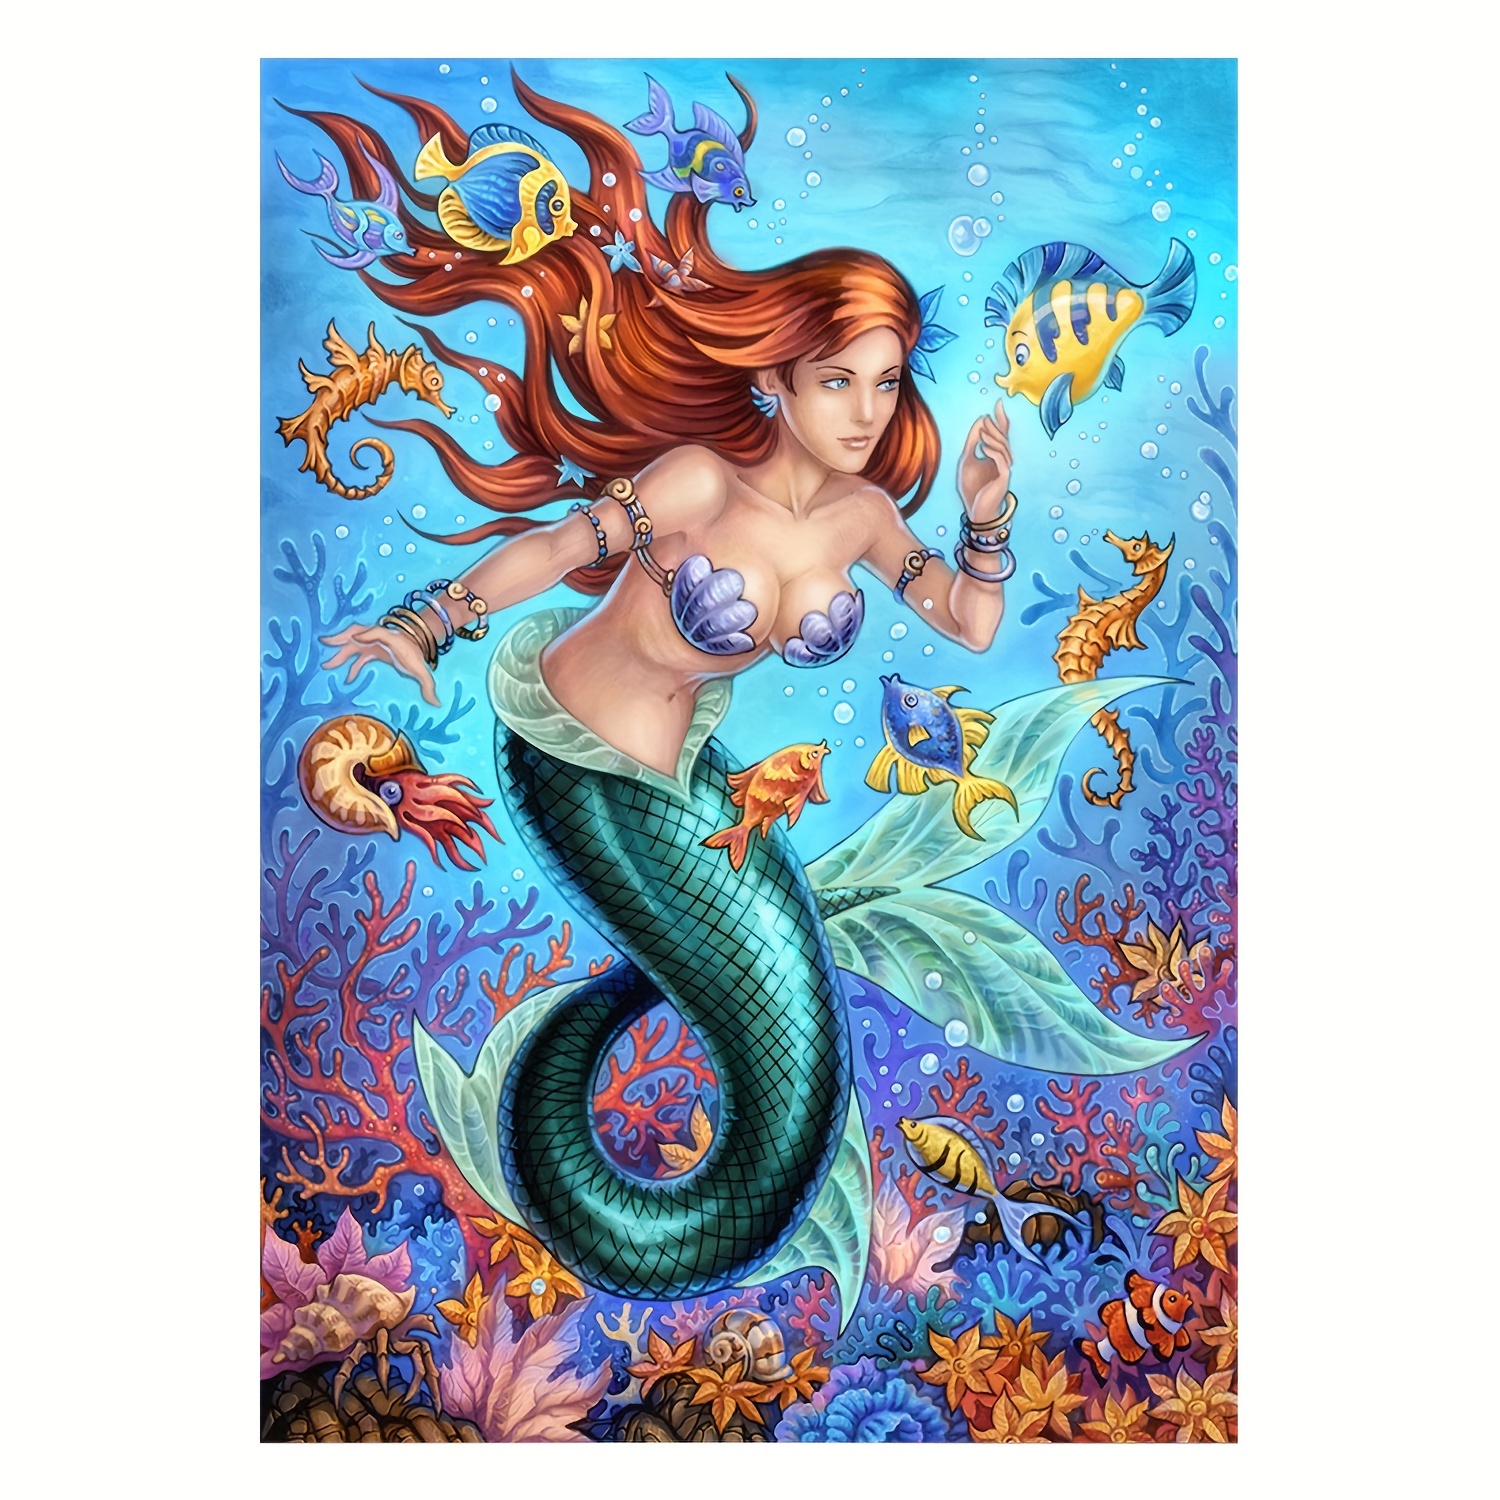 The Little Mermaid Disney Diamond Art DIY 5D Diamond Painting Kits for Adults and Kids Full Drill Arts Craft by Number Kits for Beginner Home